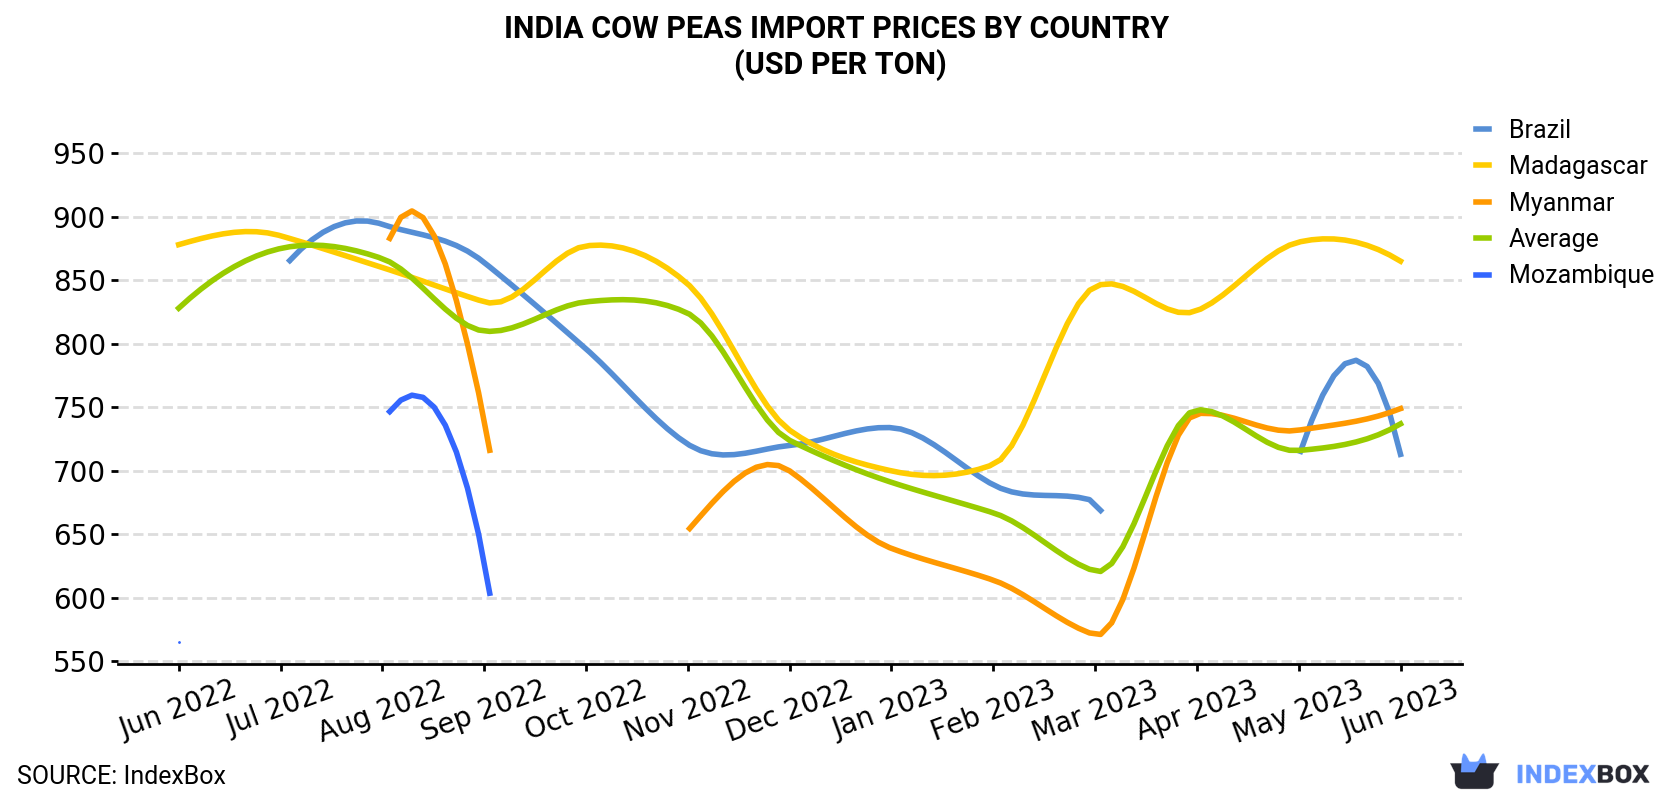 India Cow Peas Import Prices By Country (USD Per Ton)